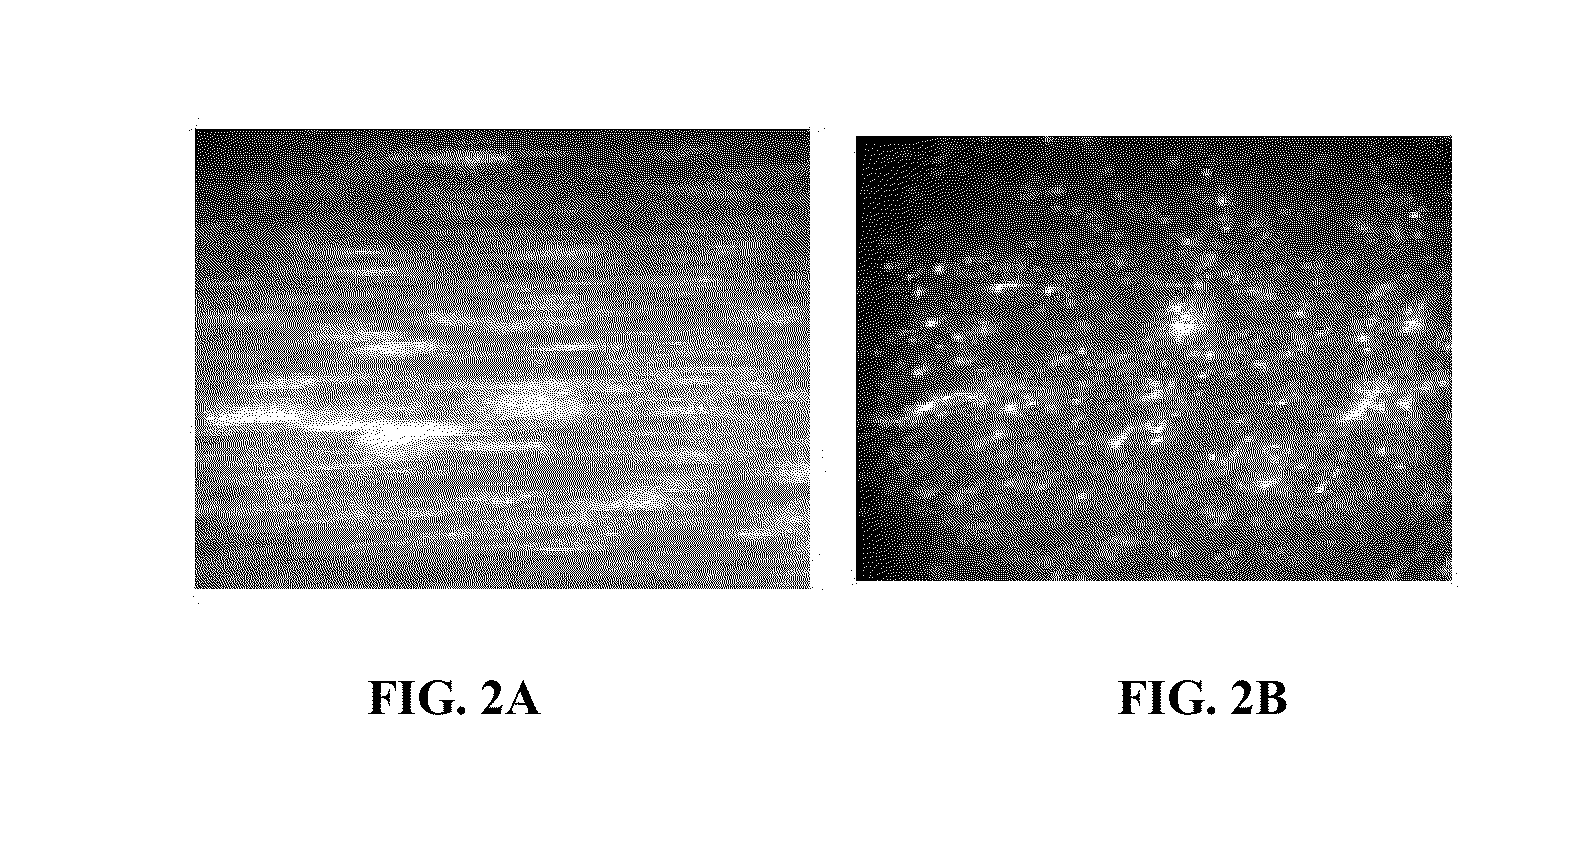 Systems and methods for detection of particles in a beneficial agent